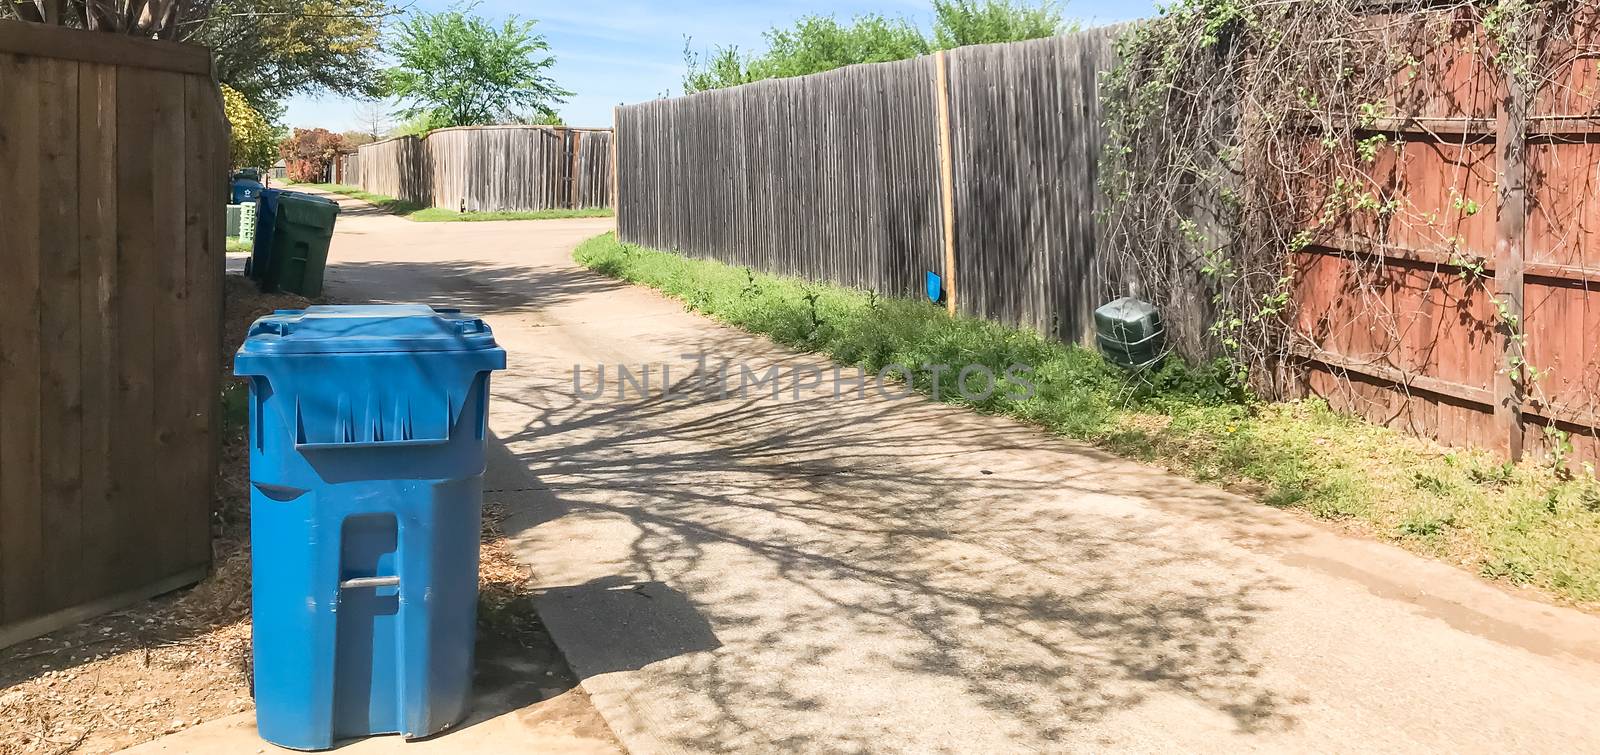 Panorama view empty back alley in residential neighborhood with wooden fence with vines and trash, recycle bin. Quiet suburban area near Dallas, Texas, USA